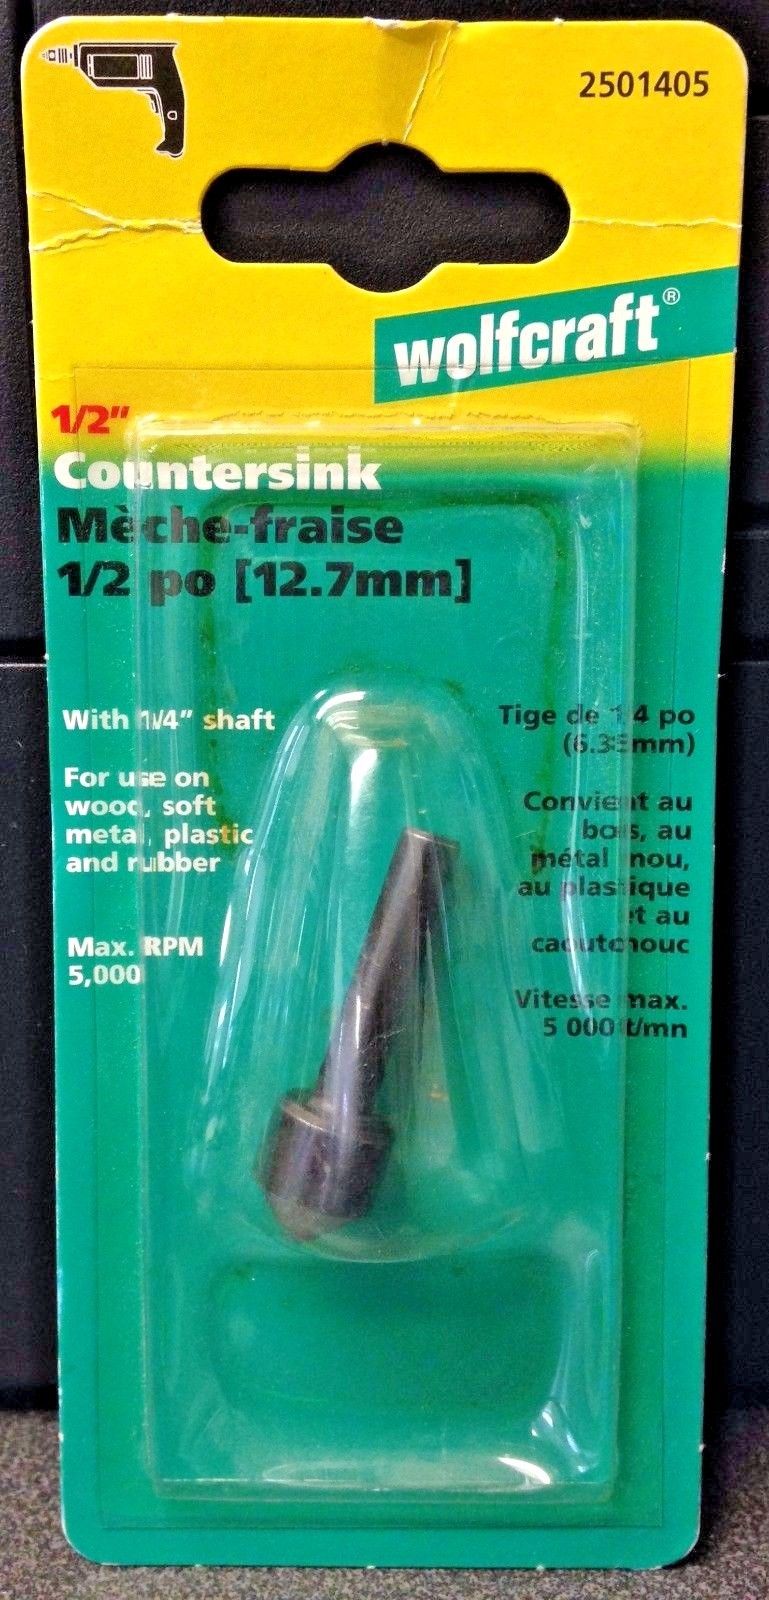 Wolfcraft 2501405 1/2" Countersink Made in Germany With 1/4" Shank